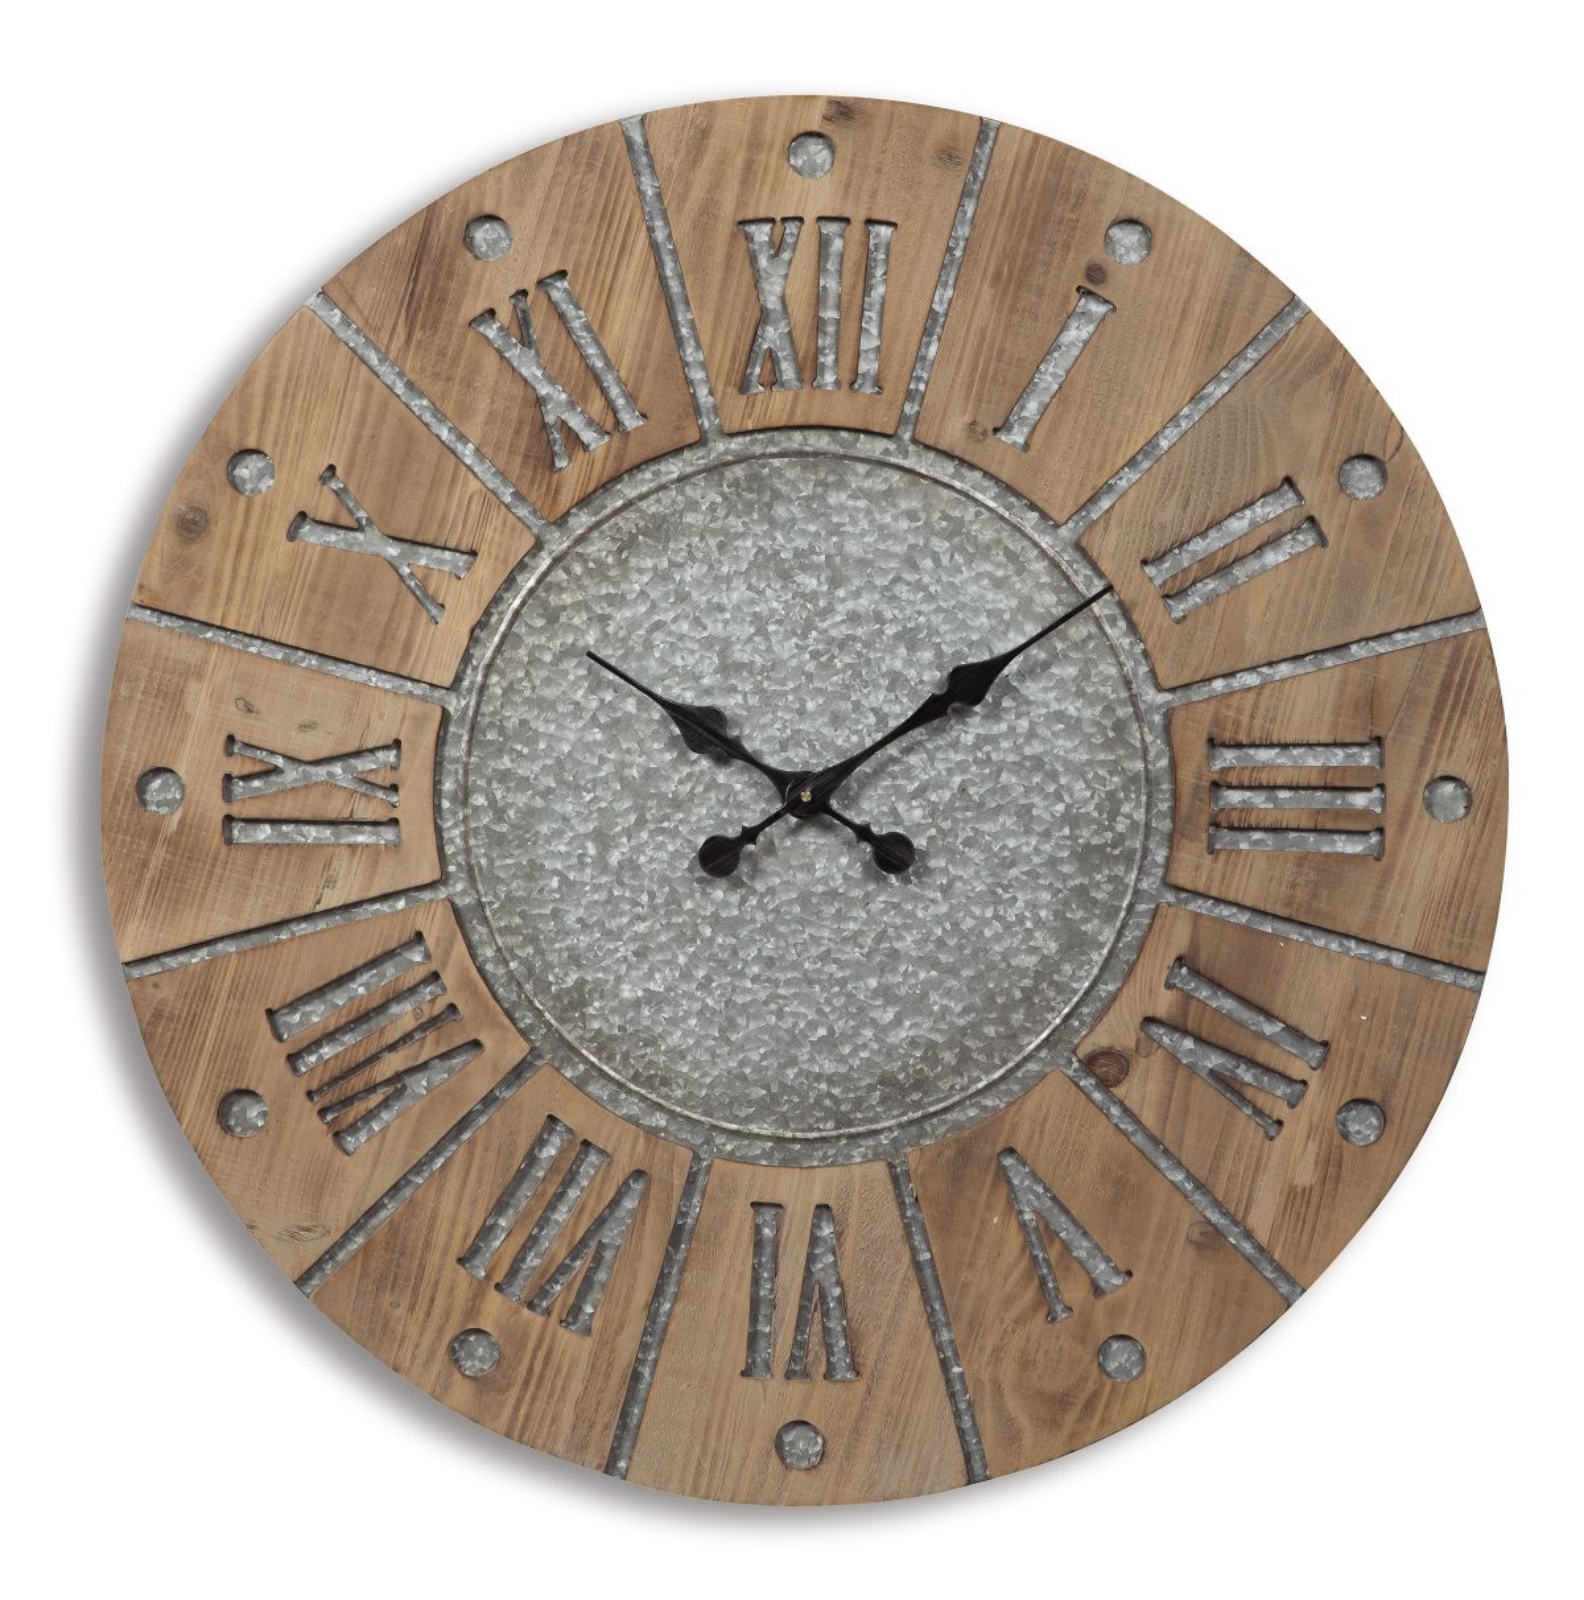 Picture of Payson Wall Clock